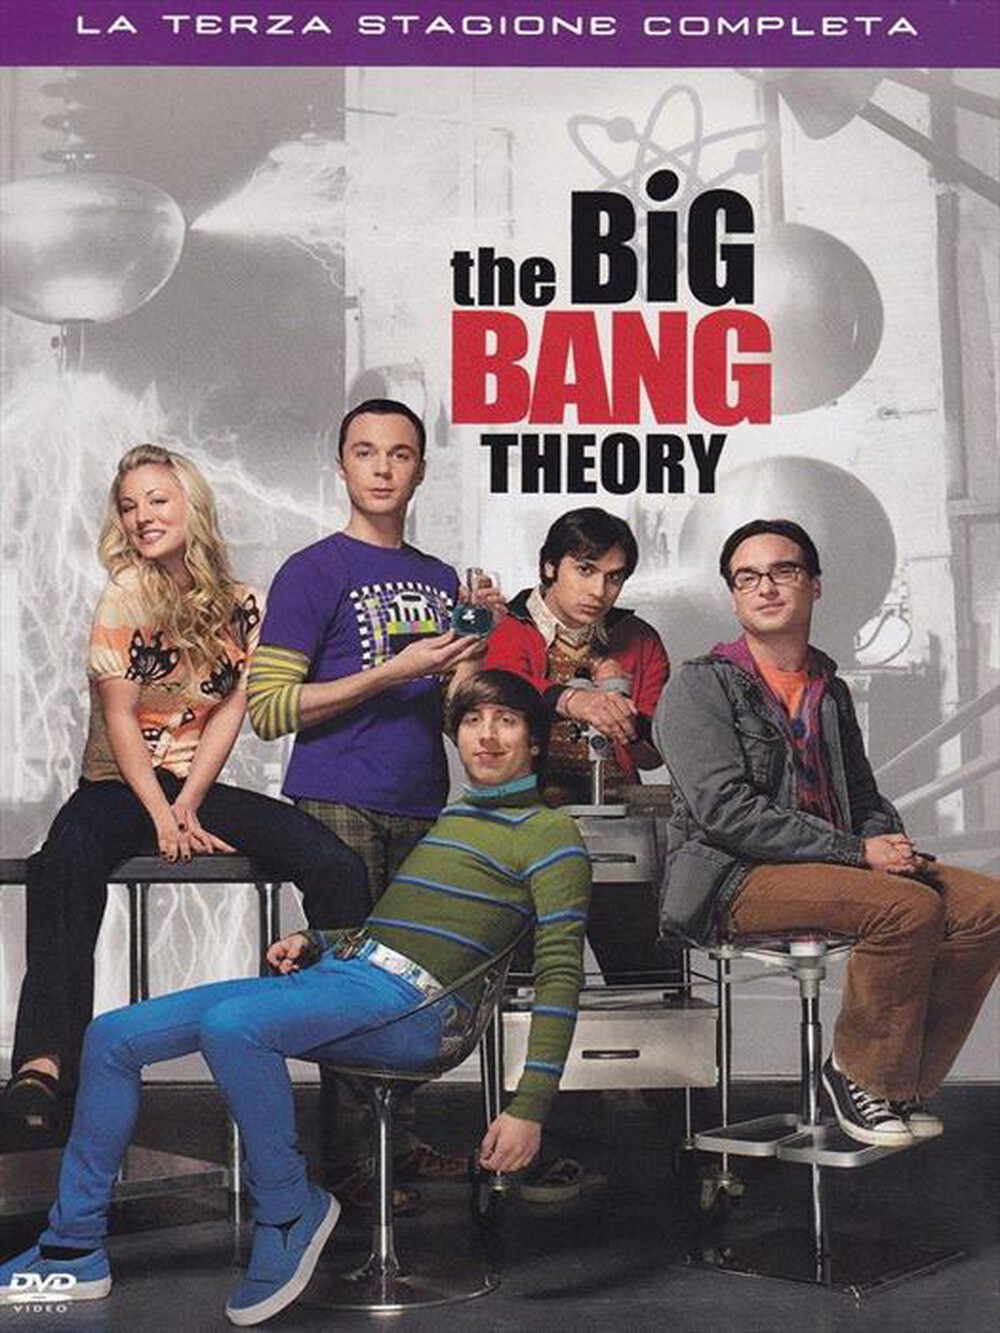 "WARNER HOME VIDEO - Big Bang Theory (The) - Stagione 03 (3 Dvd) - "